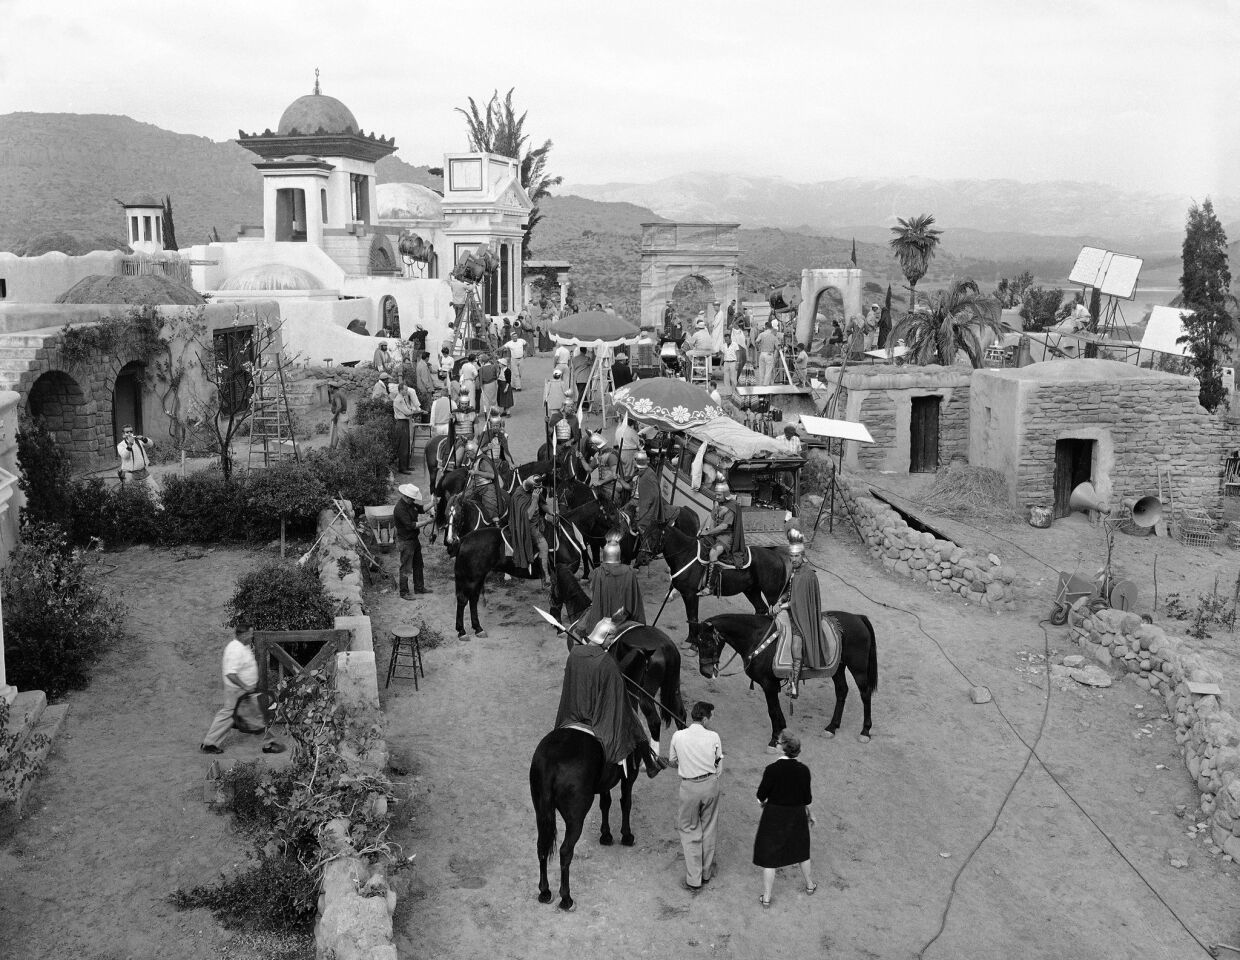 General view of the set built at Chatsworth, Calif., for "The Big Fisherman" on Oct. 24, 1958. The buildings depict the city of Tiberias built on a hill overlooking the Sea of Galilee. In the foreground are extras dressed as Roman soldiers awaiting their cue to ride.